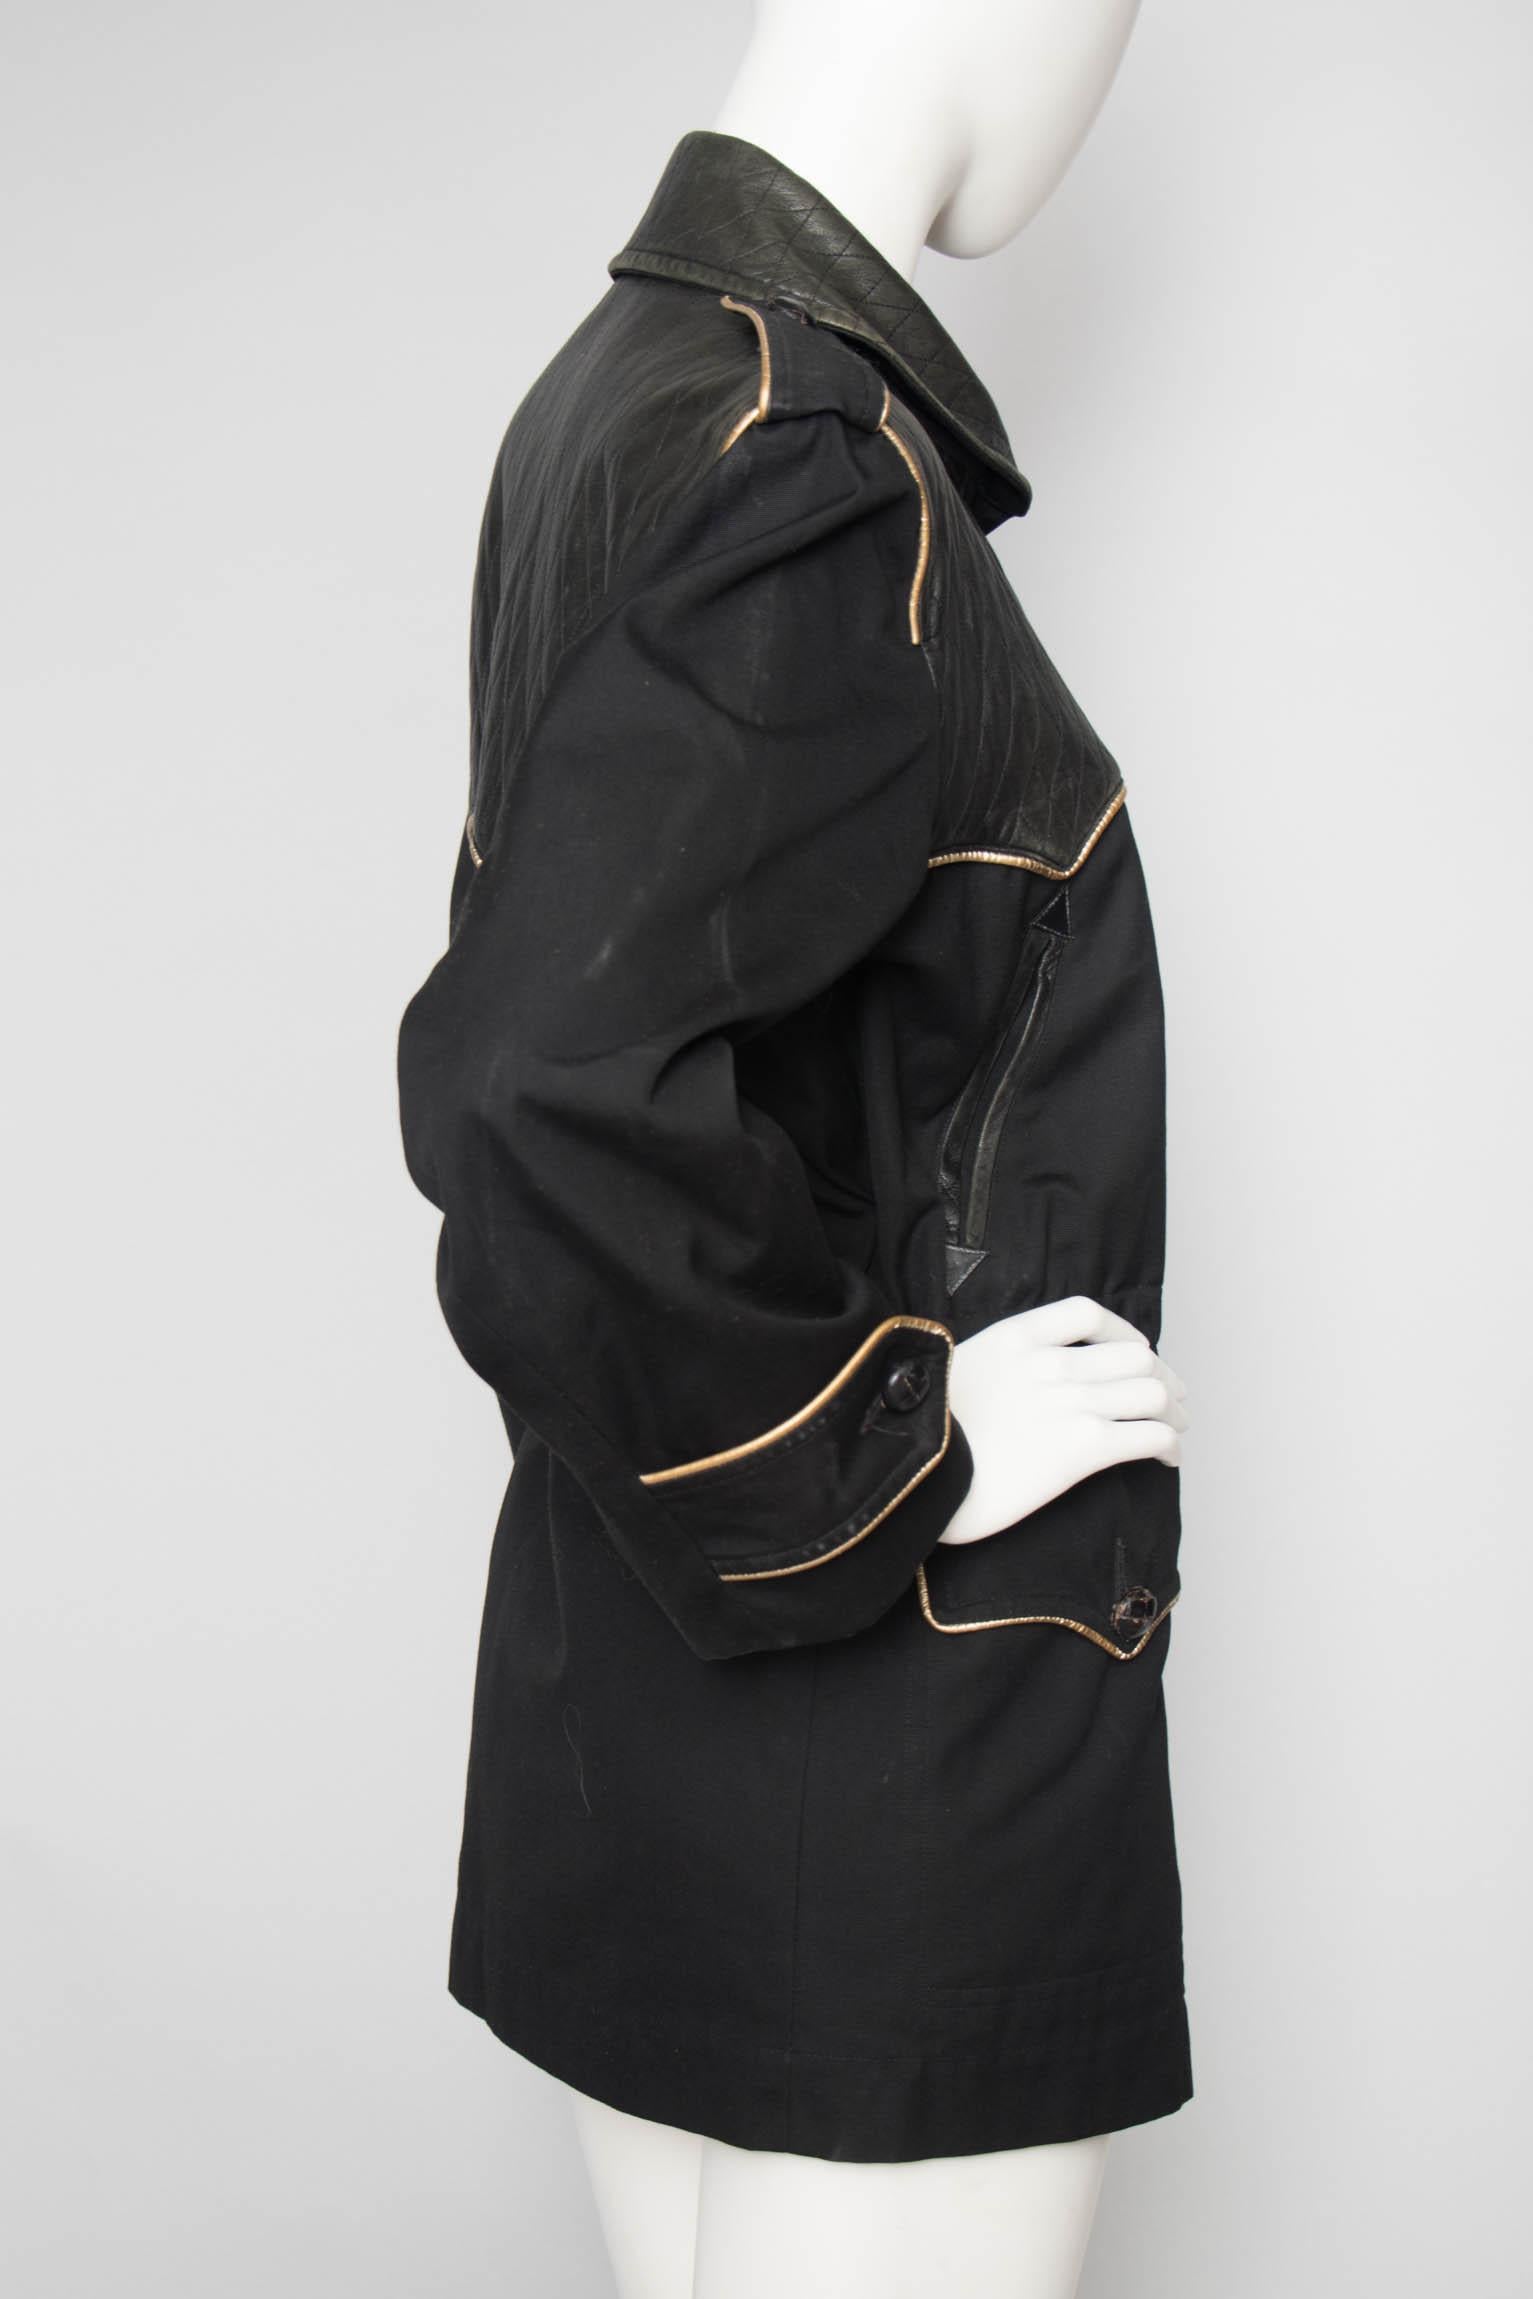 Yves Saint Laurent Rive Gauche Jacket with Leather and Gold Trim, 1980s In Good Condition In Copenhagen, DK